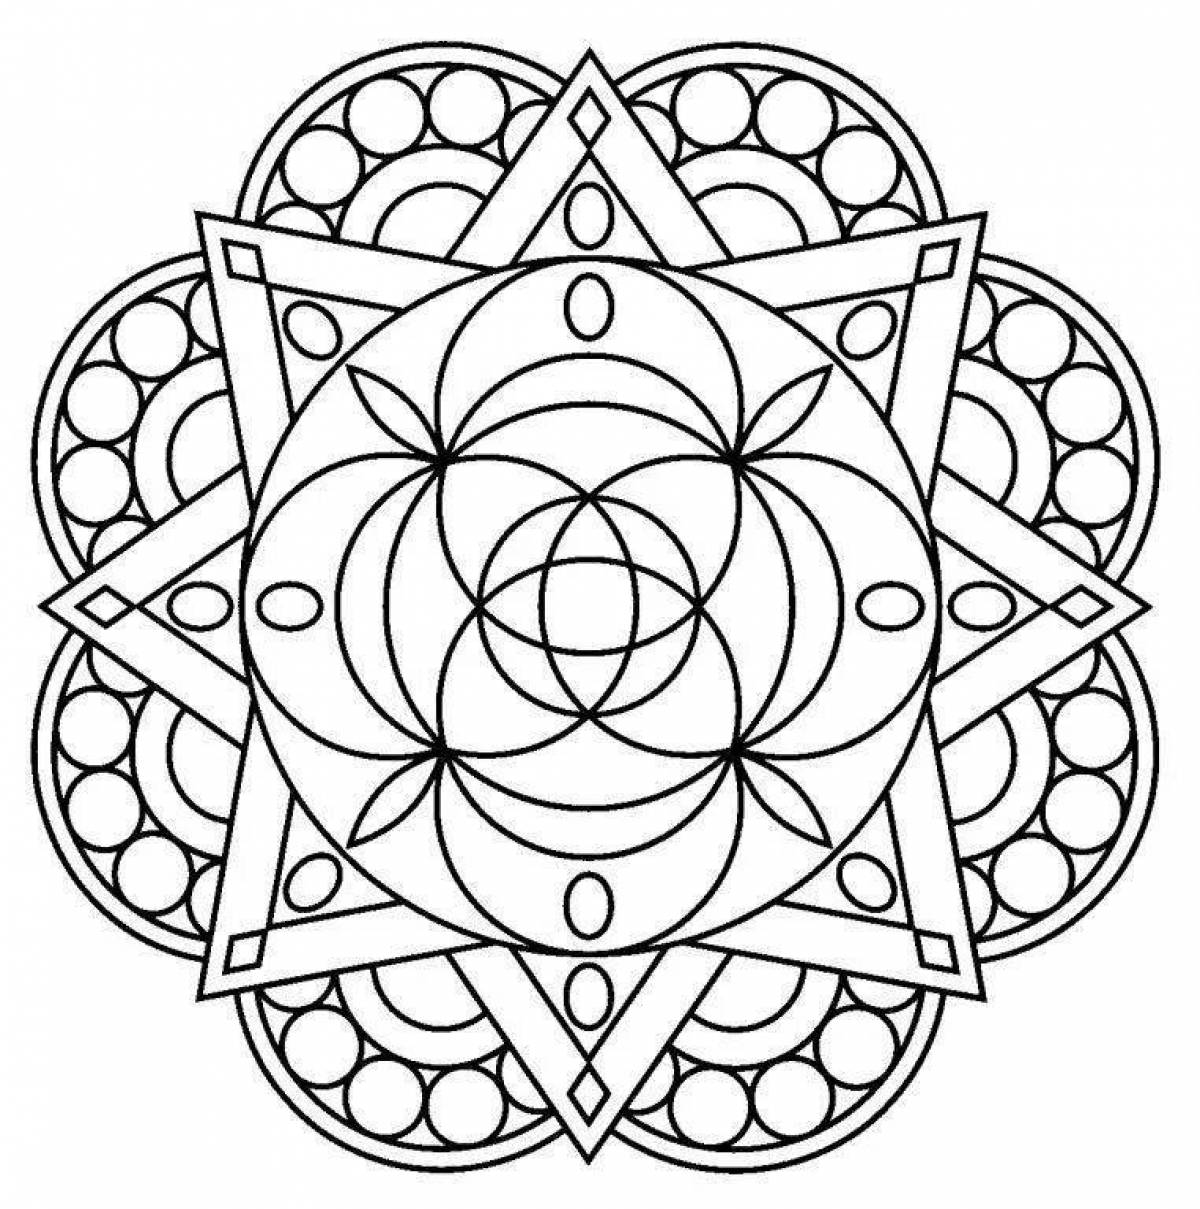 Luxury coloring mandala for good luck